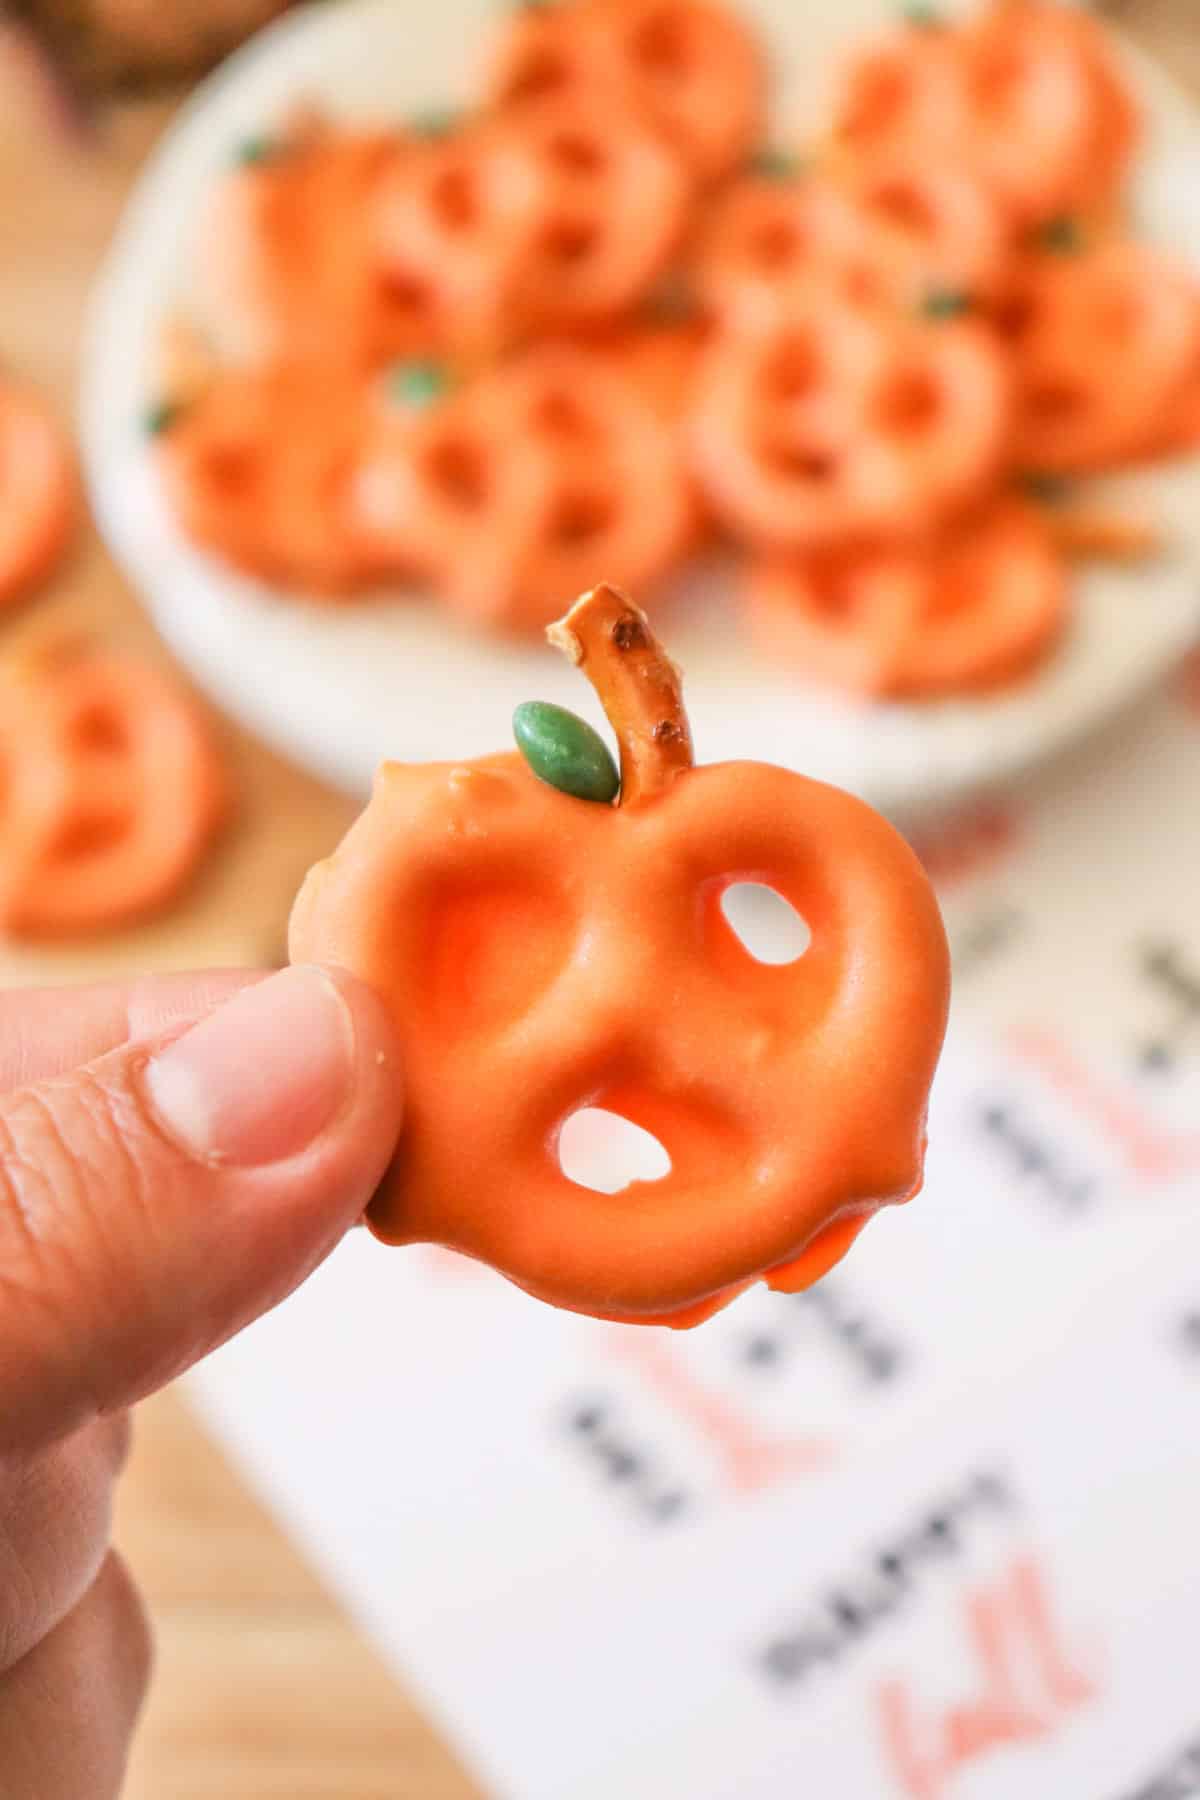 Someone holding a candy coated pumpkin pretzel so that it can be seen up close.